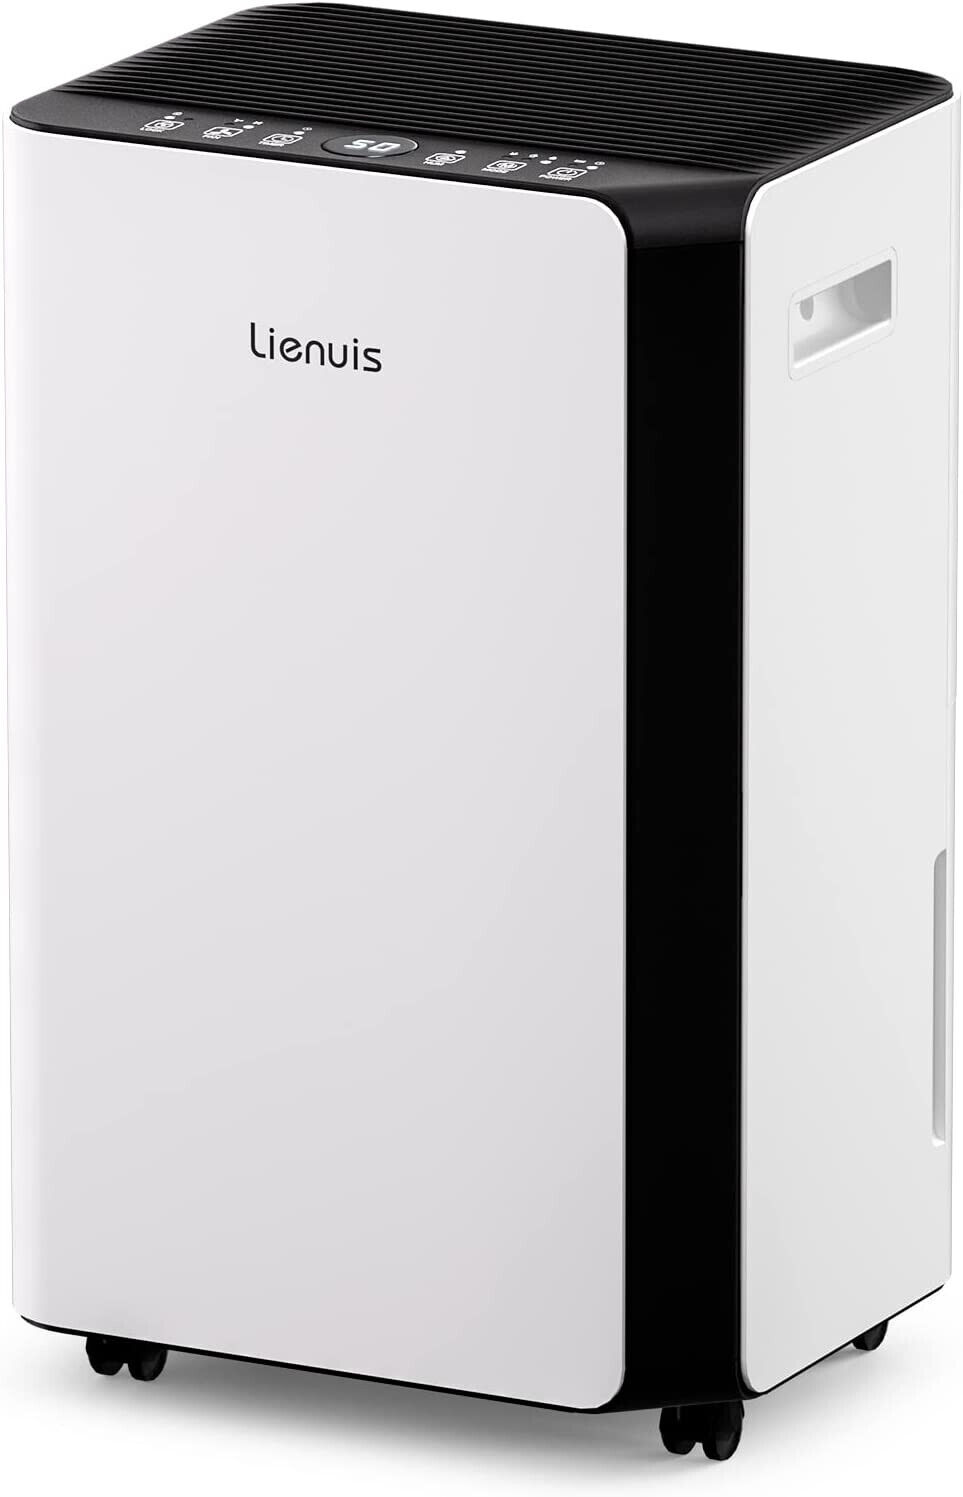 Lienuis 4000 Sq. Ft Dehumidifier with Drain Hose, Intelligent Humidity Control